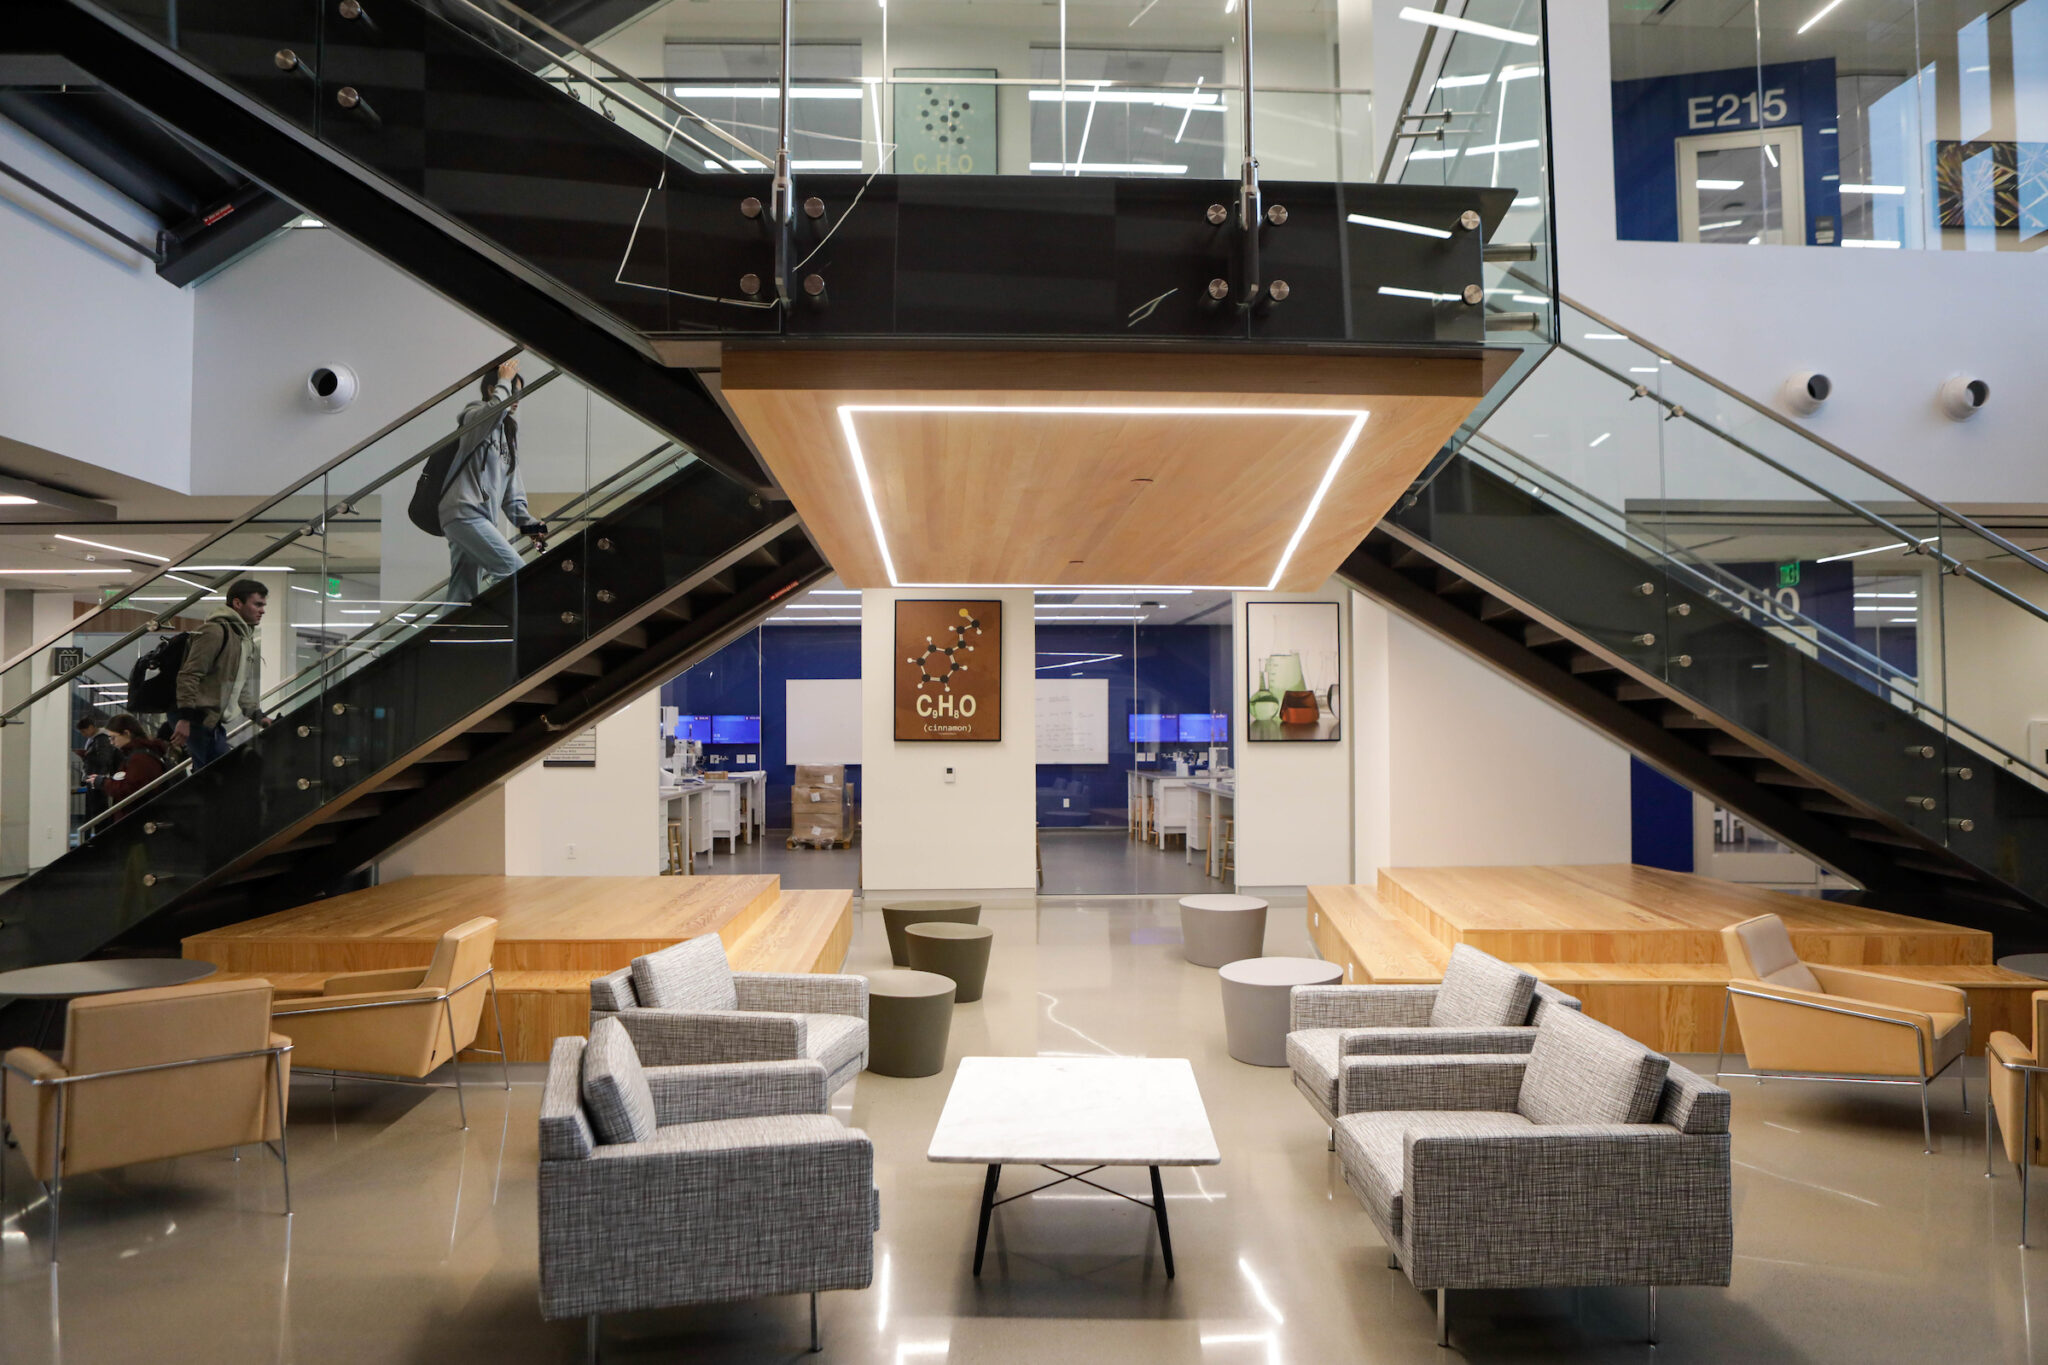 Interior view of the Instructional Laboratory and Innovative Learning Building at Texas A&amp;M University showing students ascending the main staircase in the foyer and various seating areas